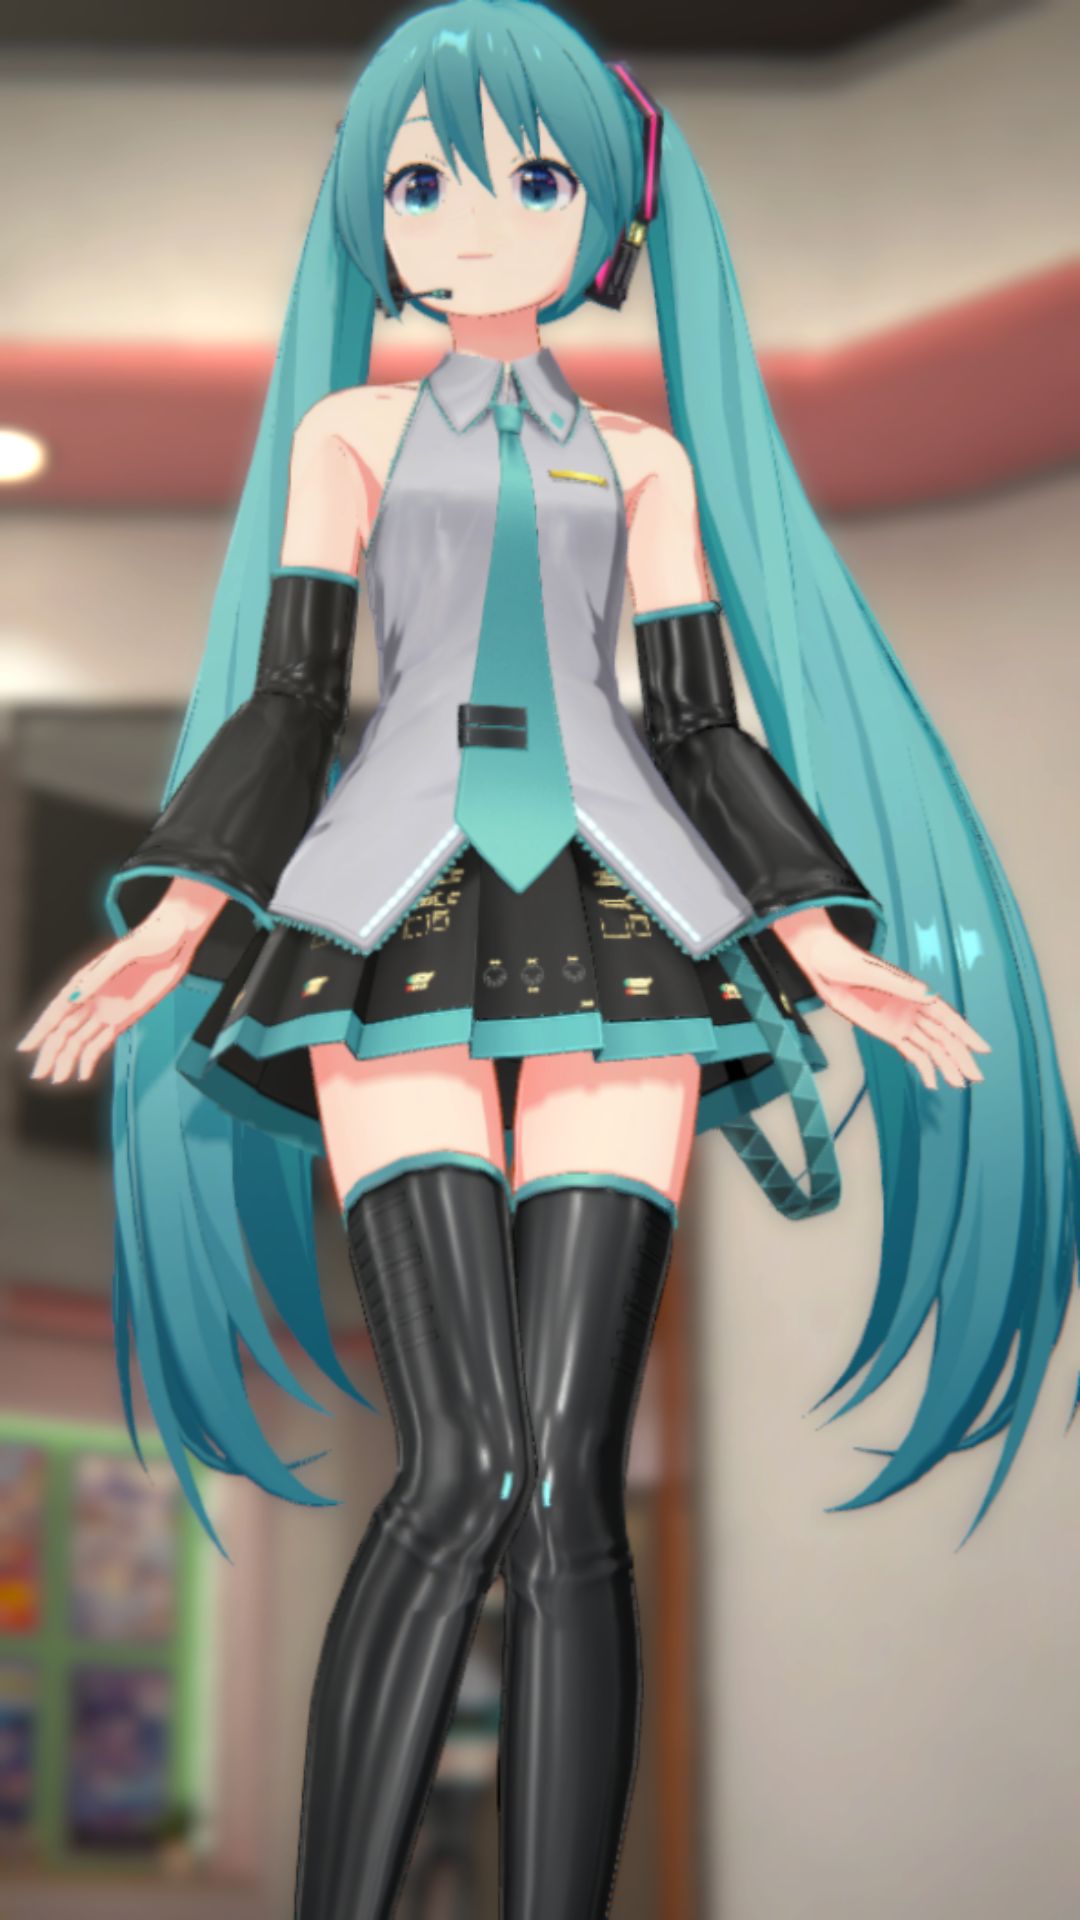 The result of peeking into the contents of the skirt of the smartphone game "IDOLY PRIDE" Hatsune Miku and Hatsune Miku costume 11